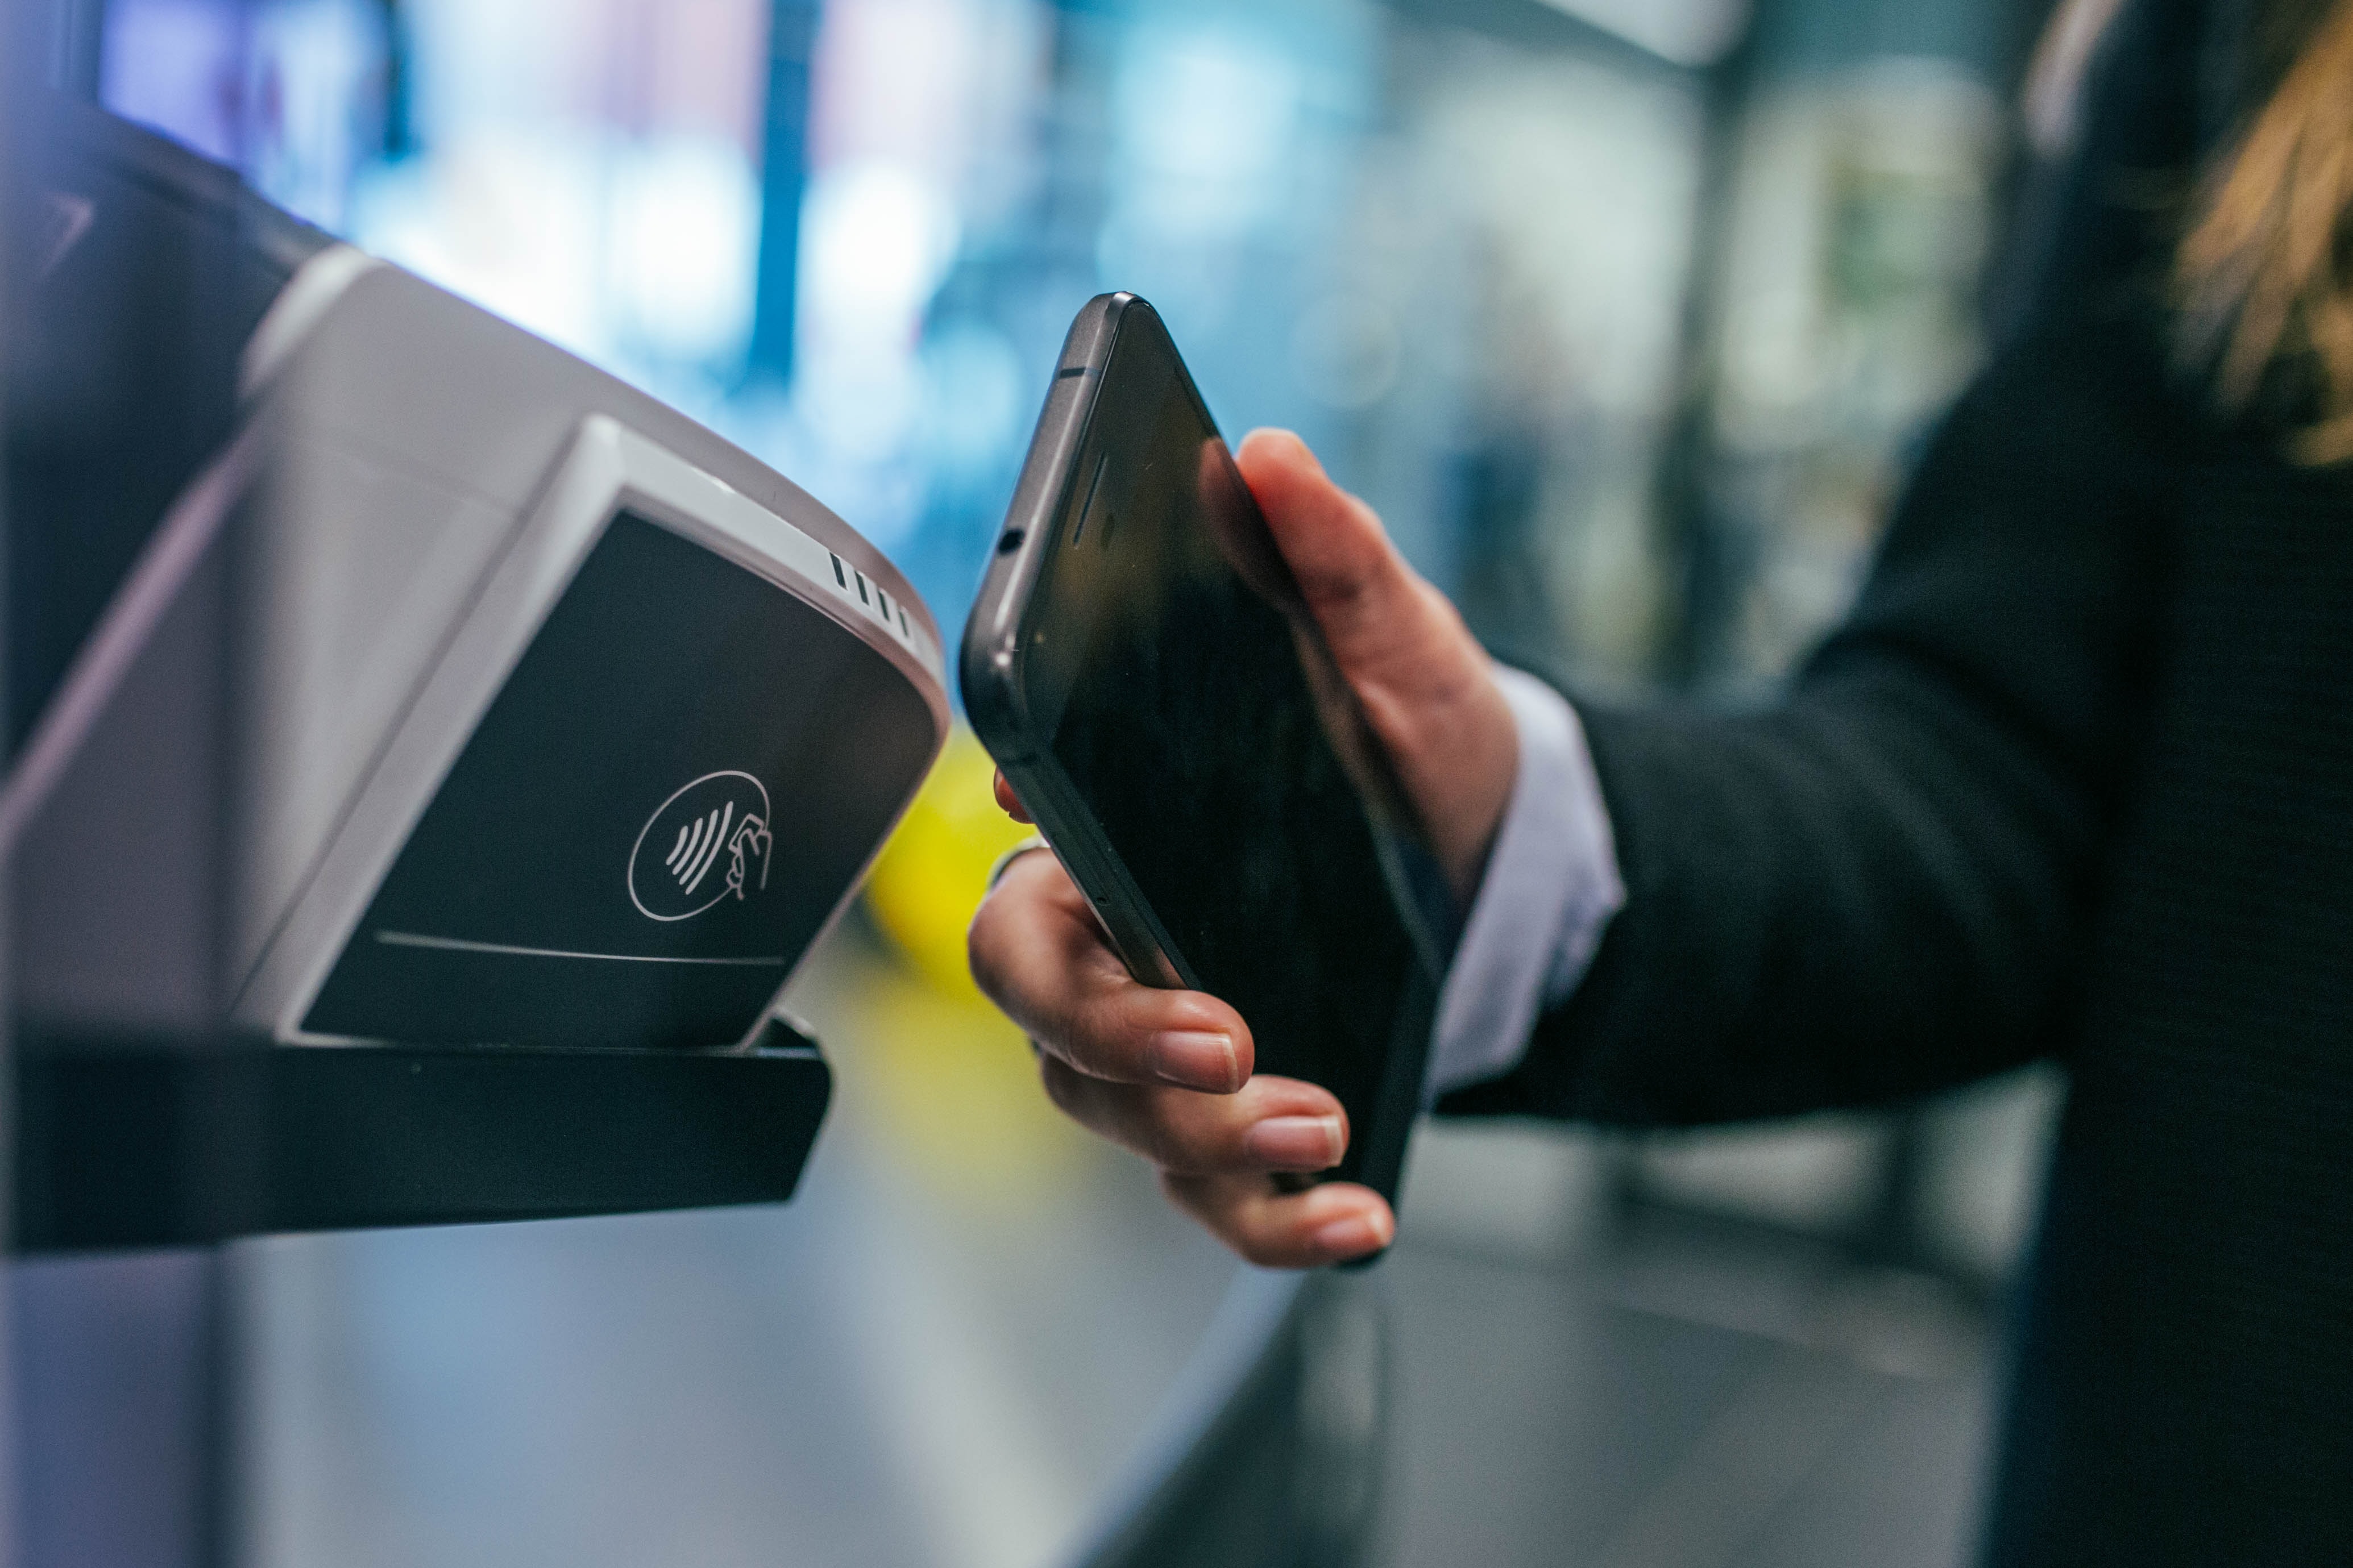 Contactless payments are ever-more popular due to the Coronavirus outbreak